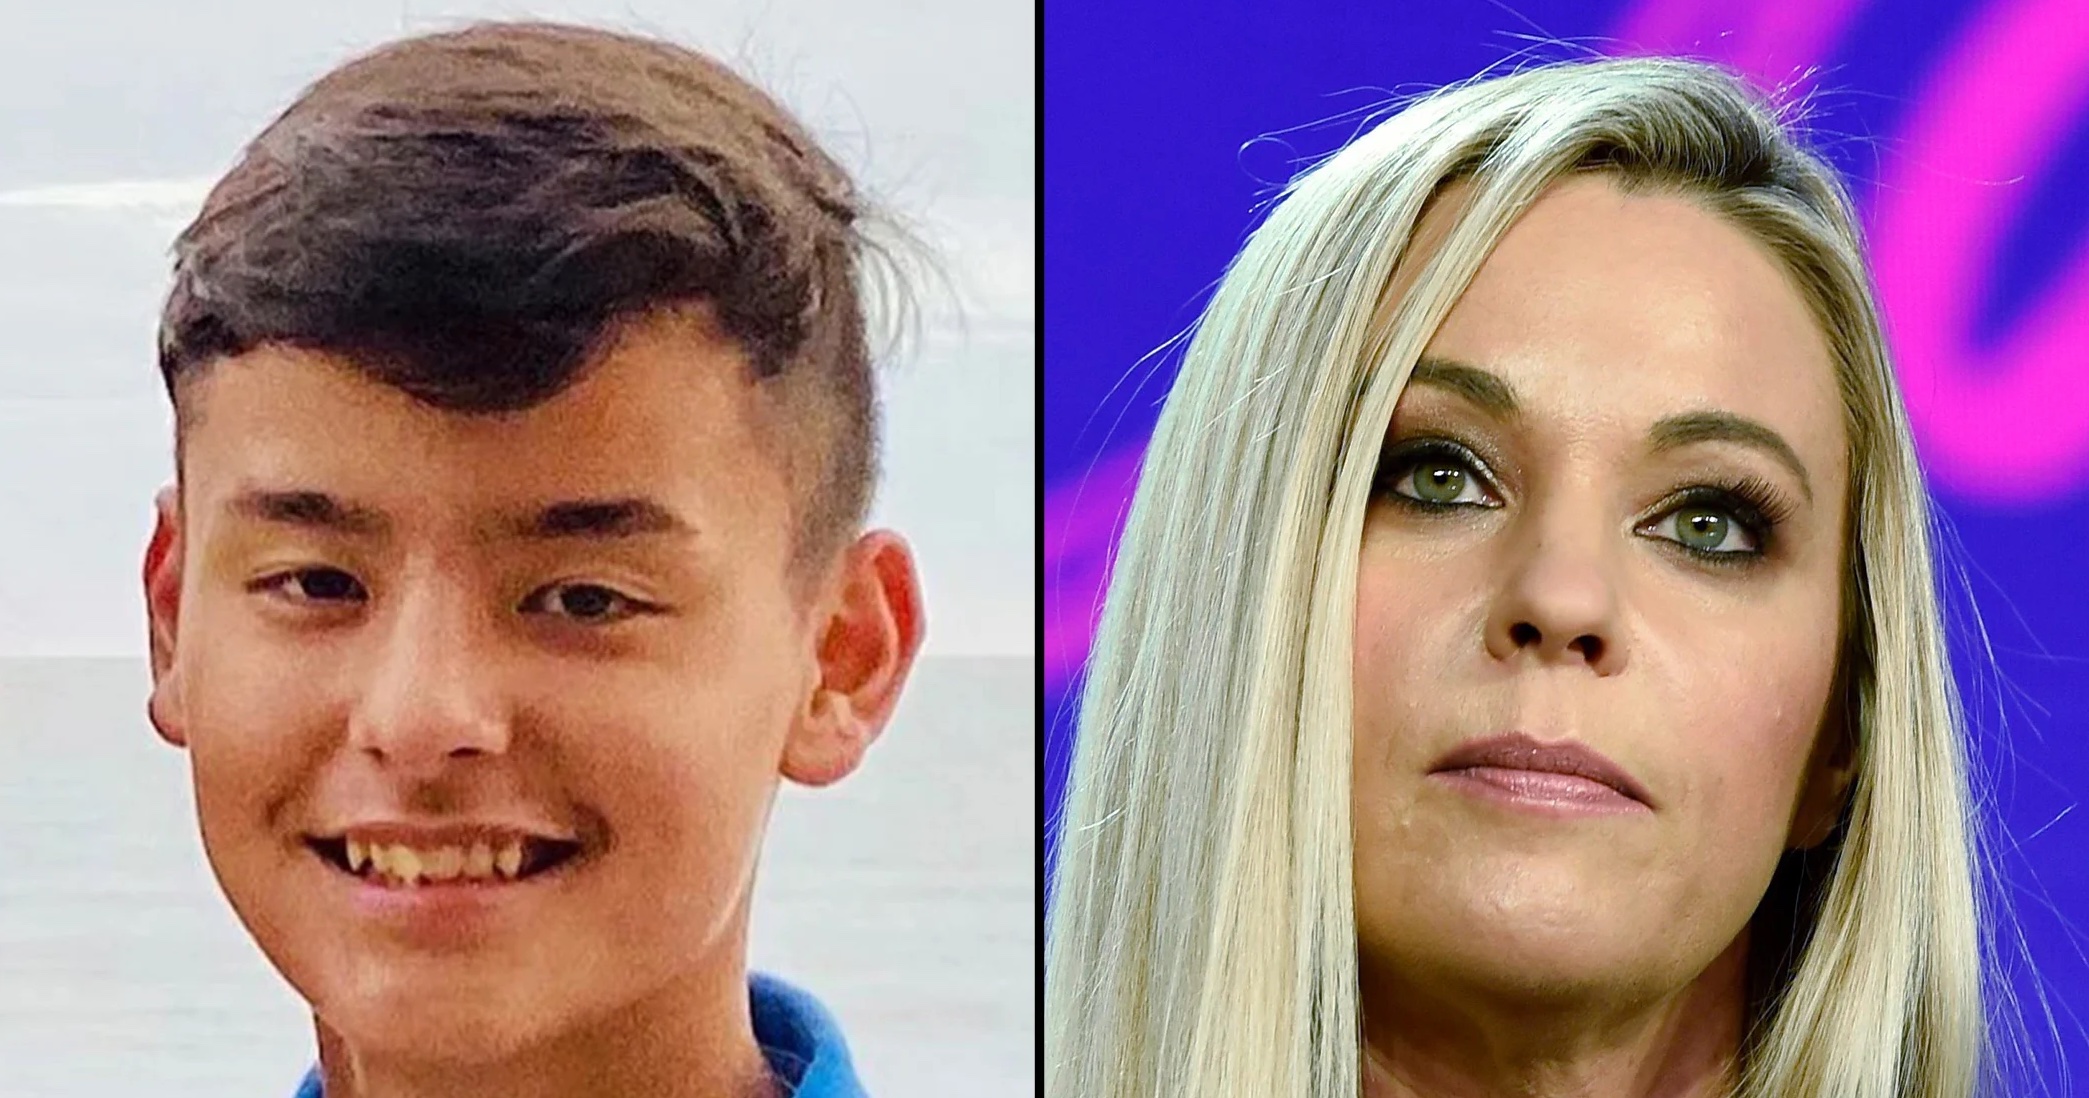 Collin Gosselin Says Being Institutionalized By Mom Kate Left Him ‘Hopeless’ And In A ‘Dark Place’